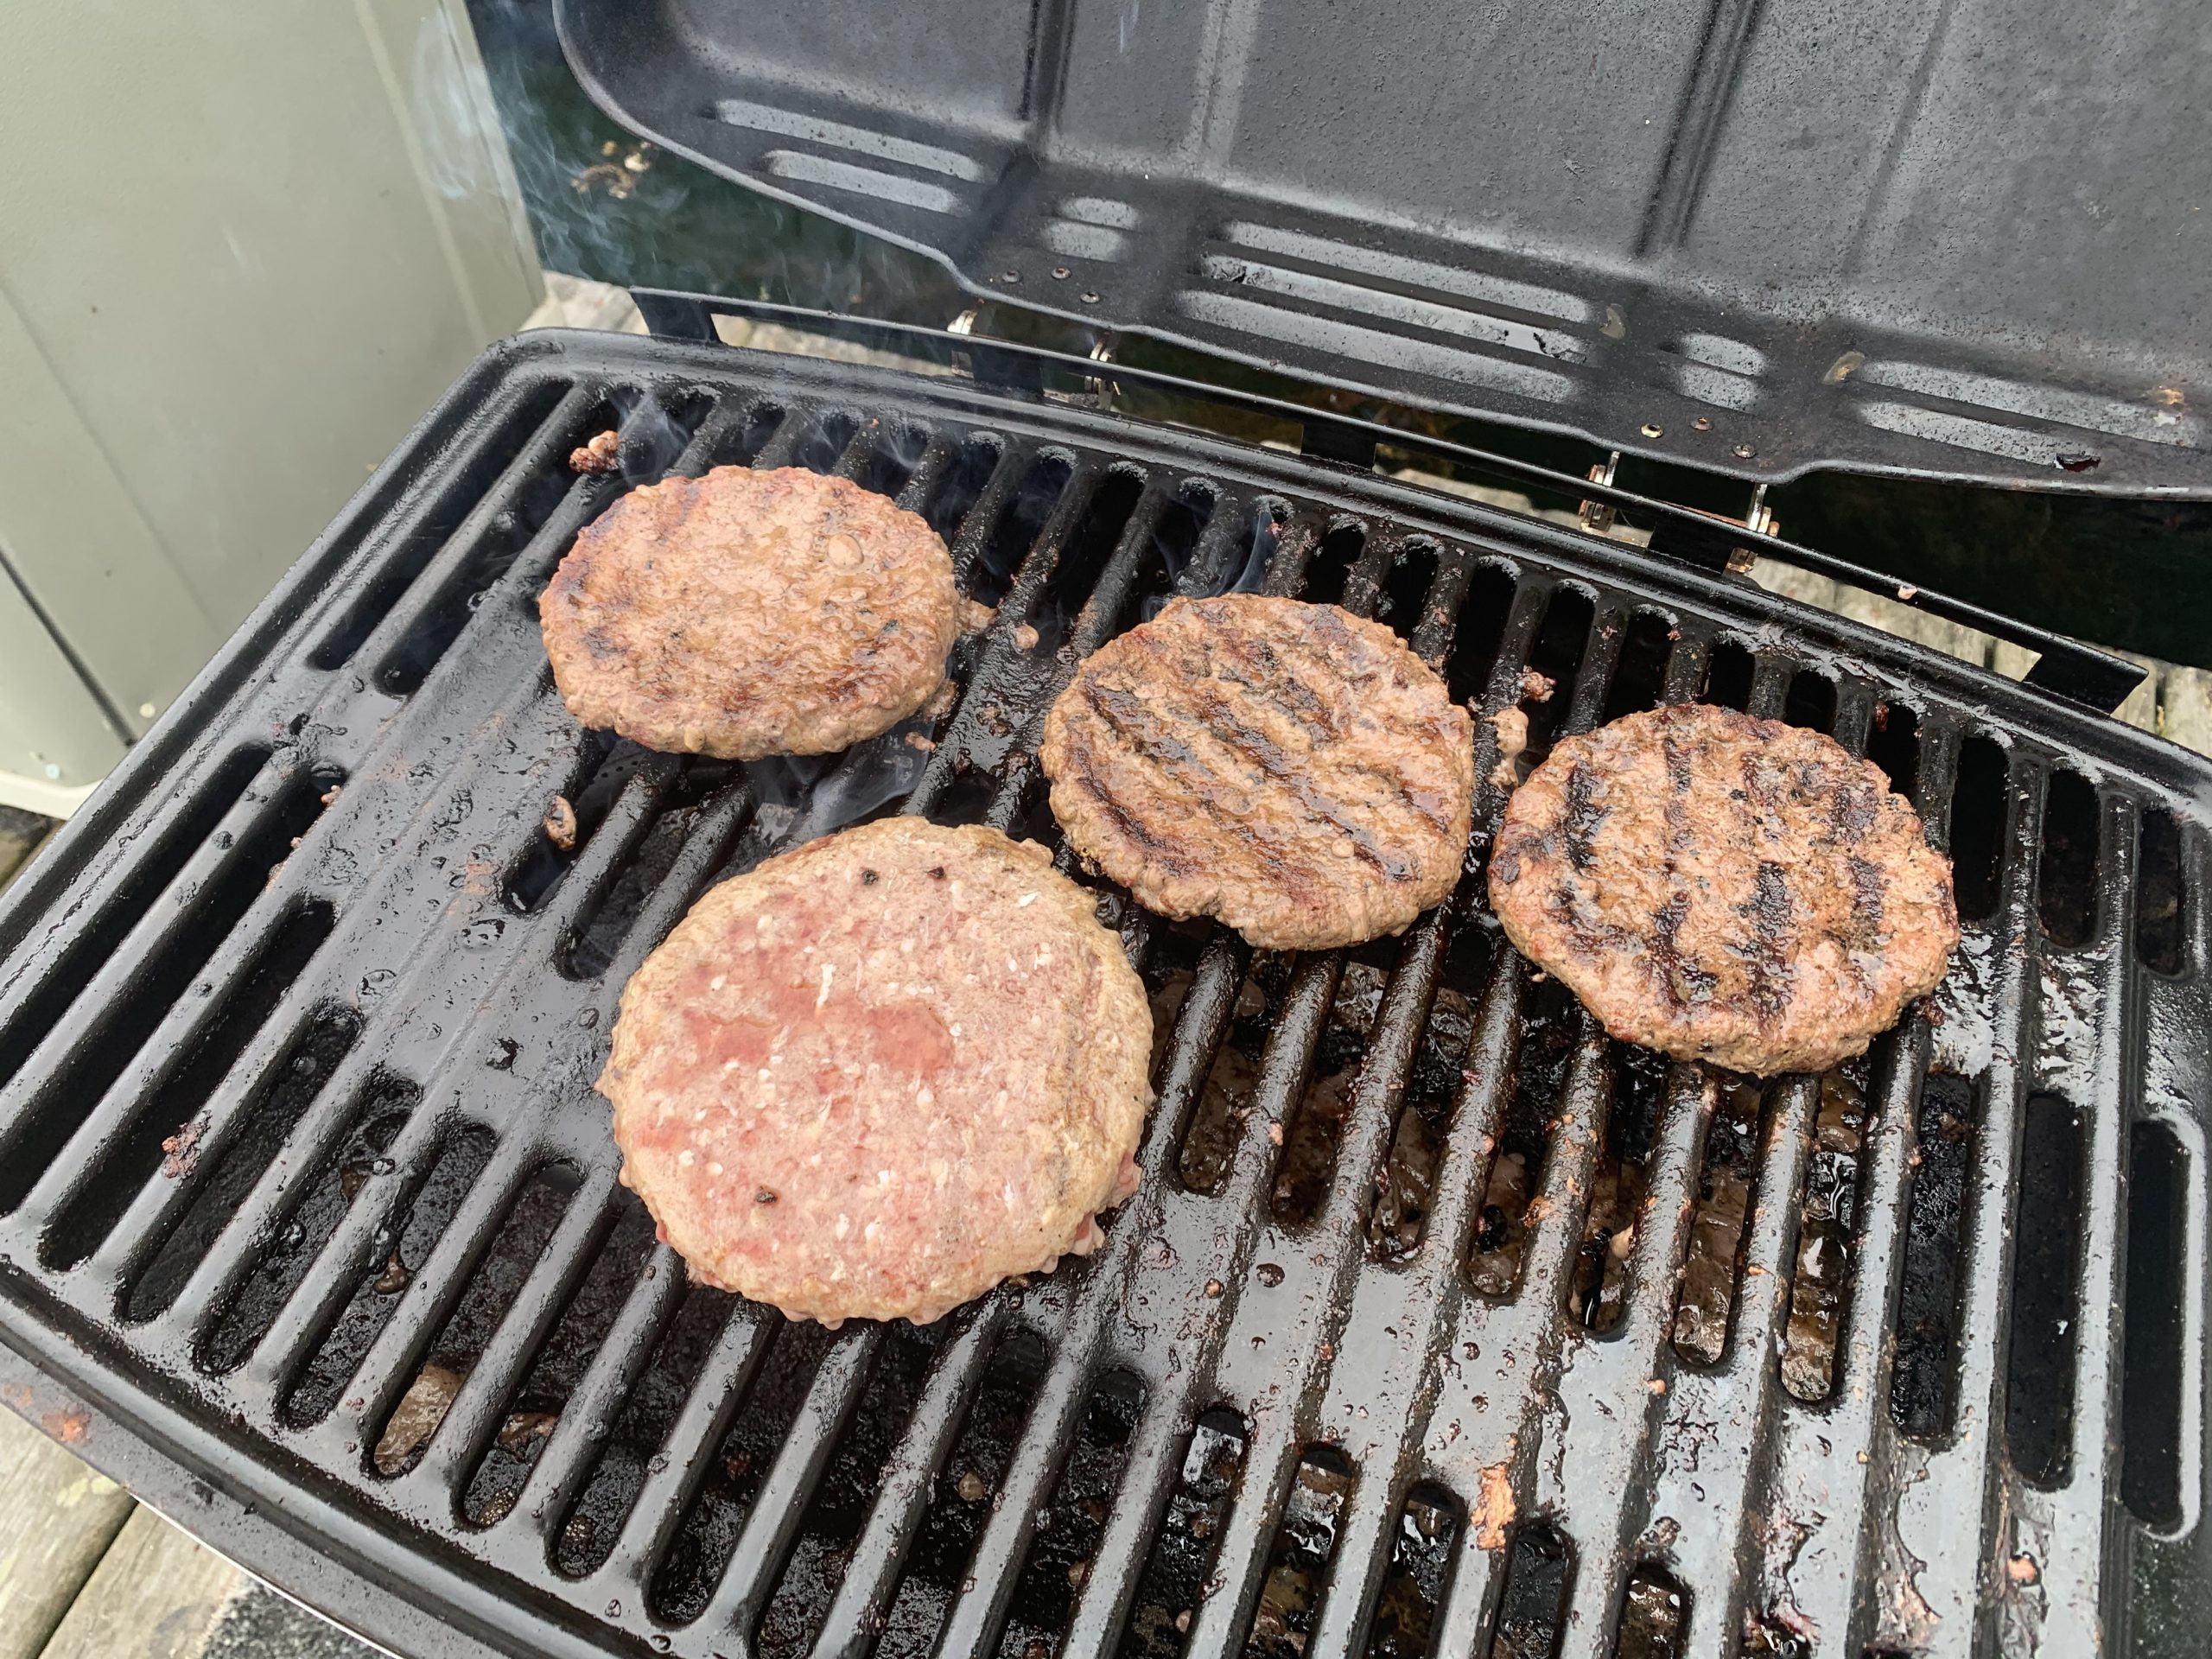 Burgers on the BBQ.